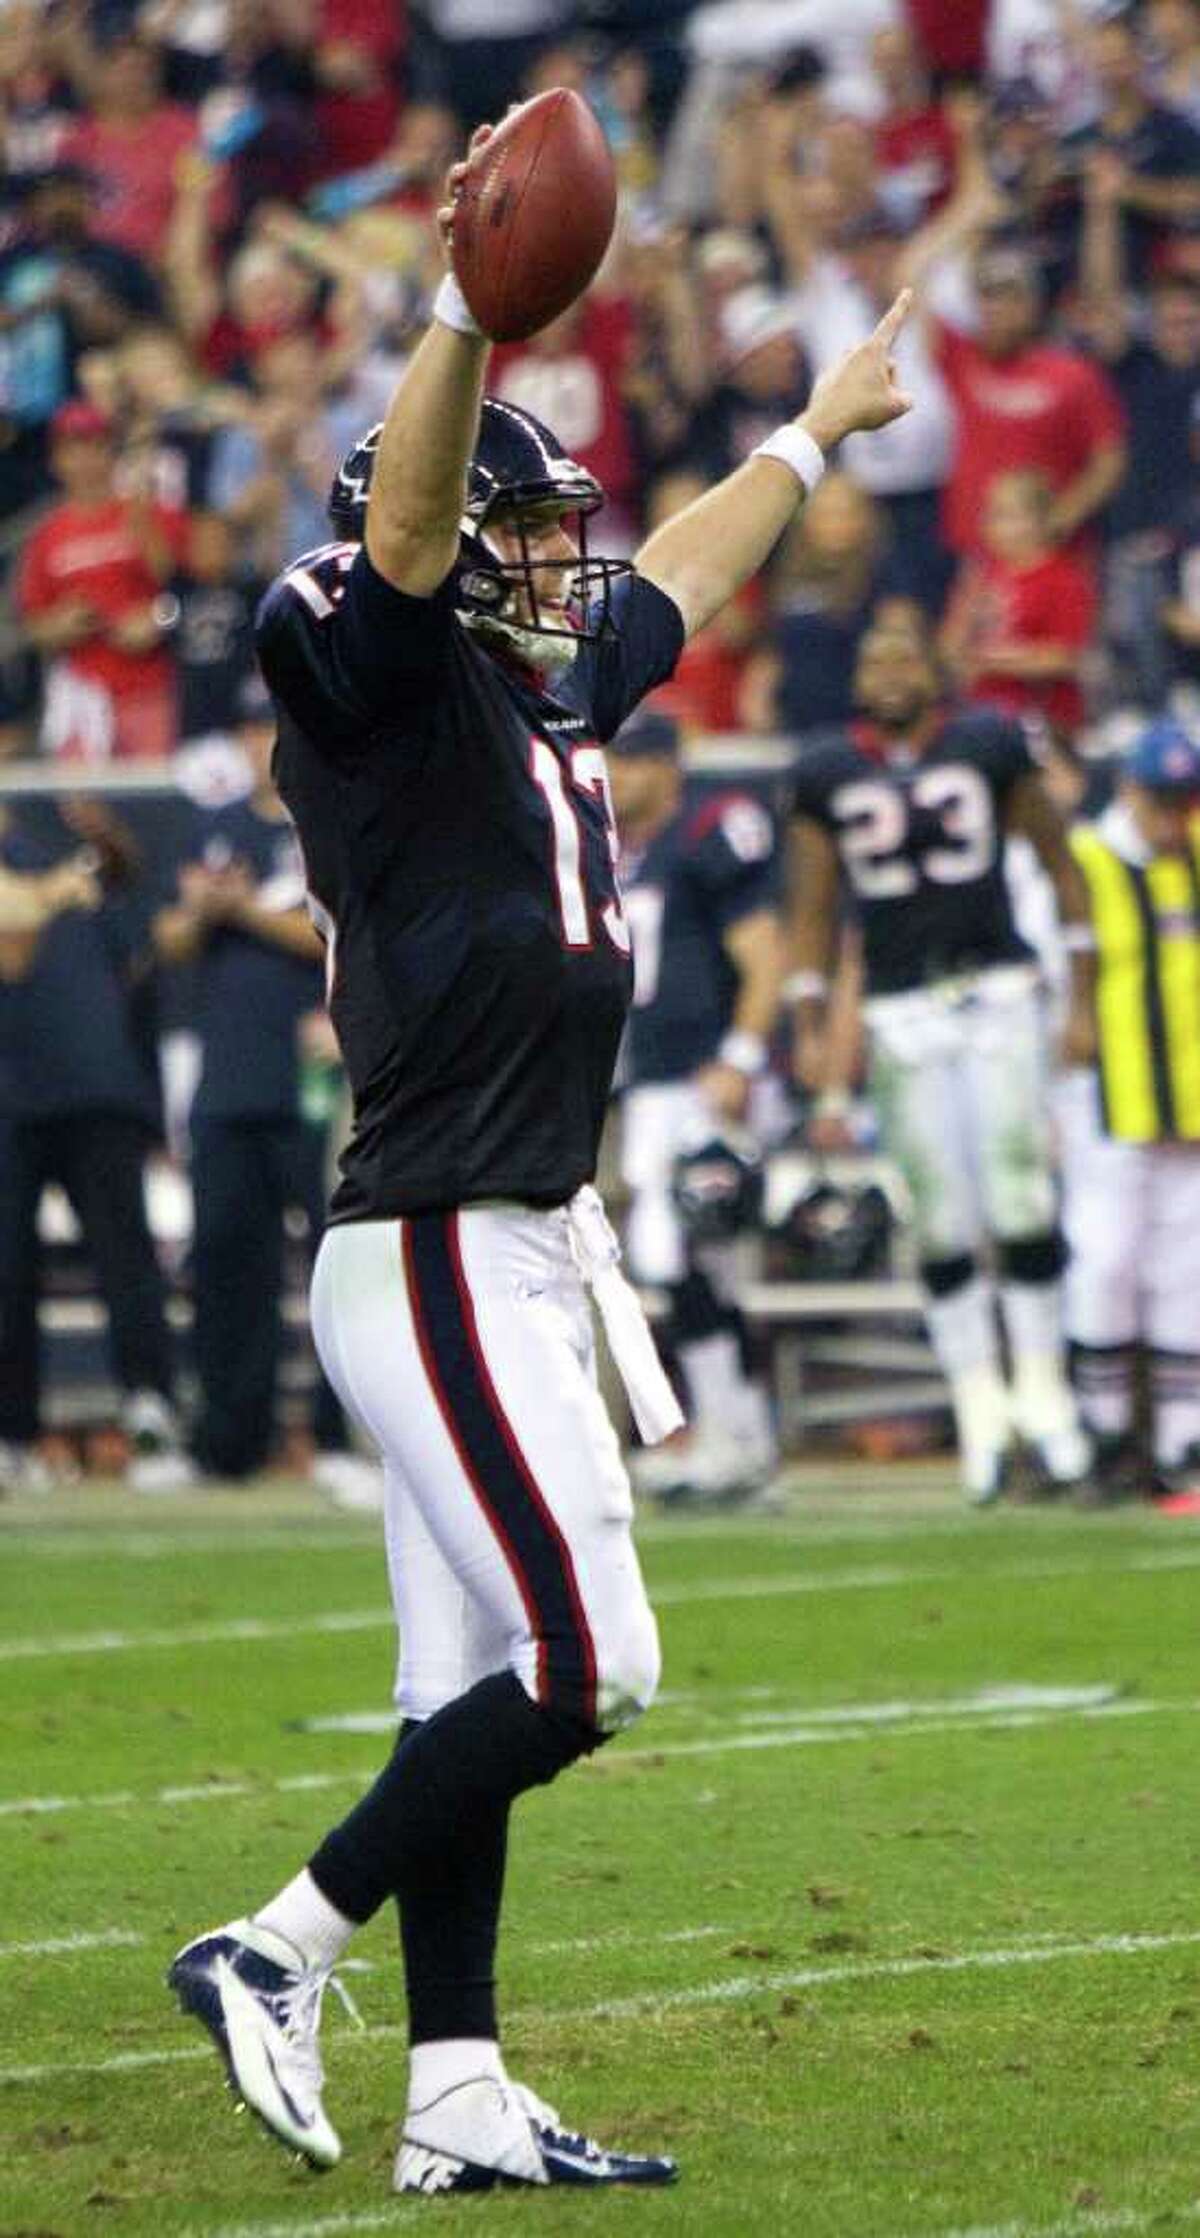 Texans rookie QB T.J. Yates celebrates the win. Yates connected on 11 of his 20 attempts for 159 yards. None of his passes found a Bengal.